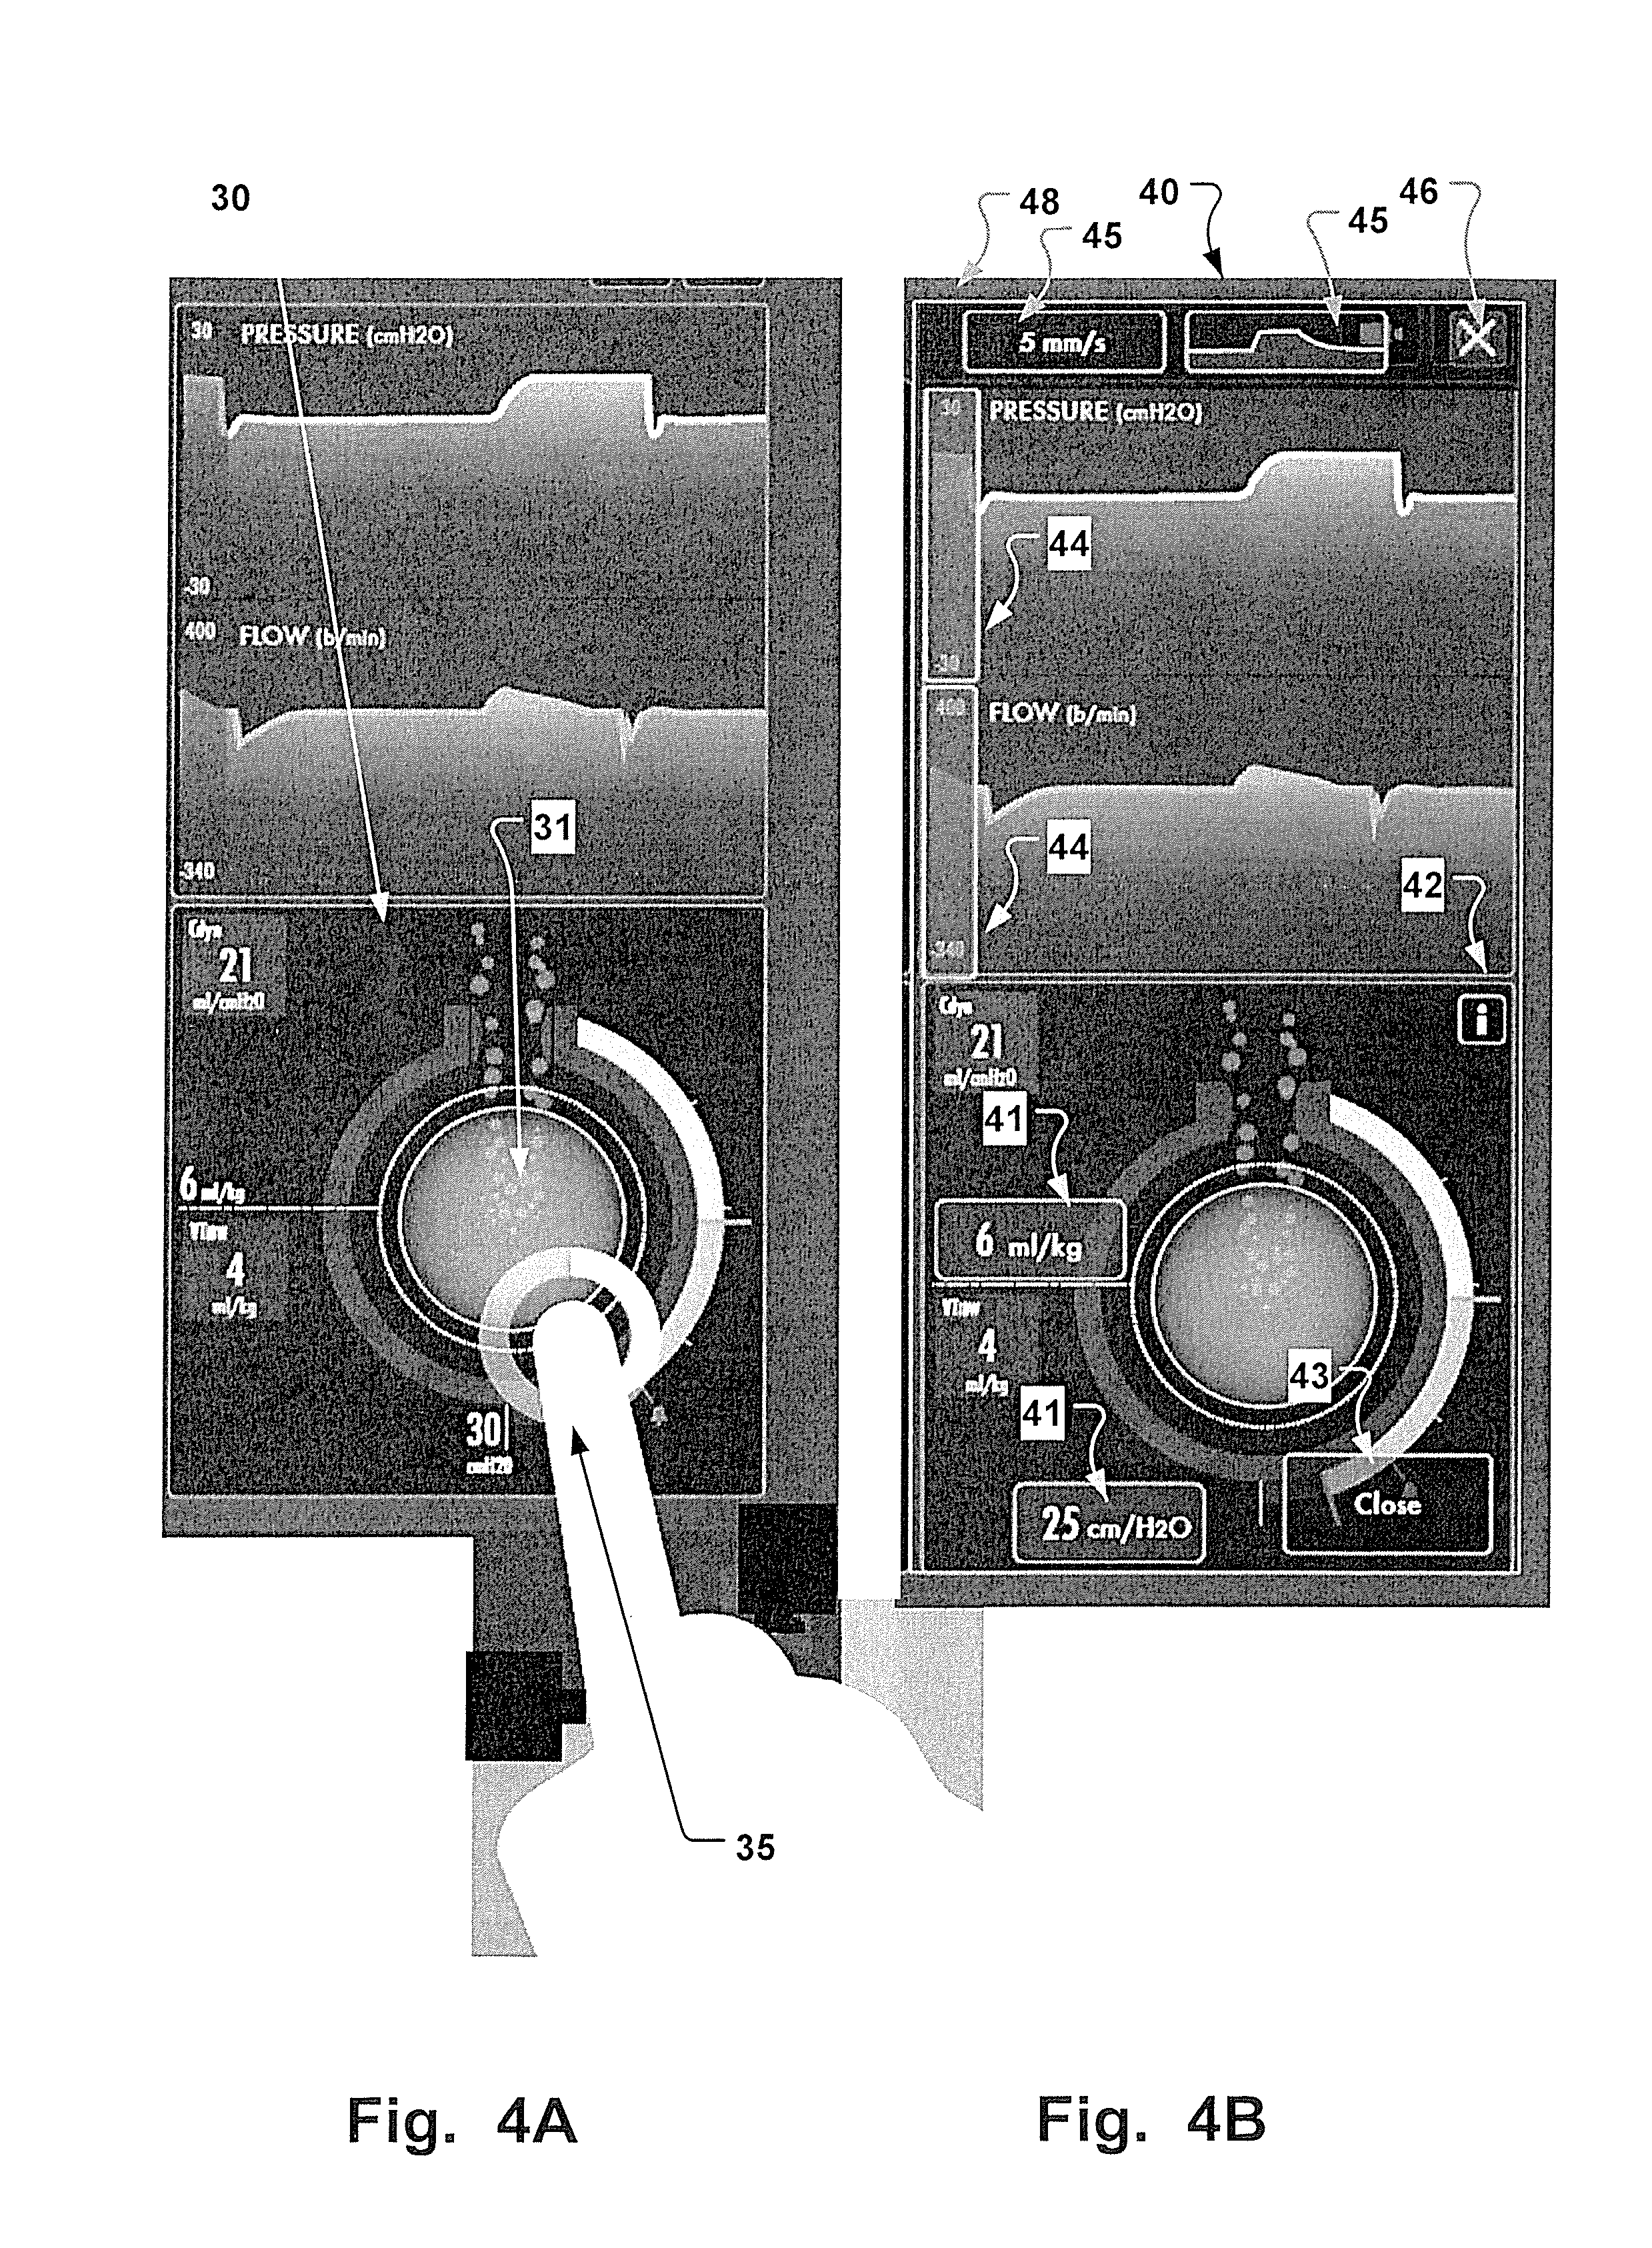 System with breathing apparatus and touch screen